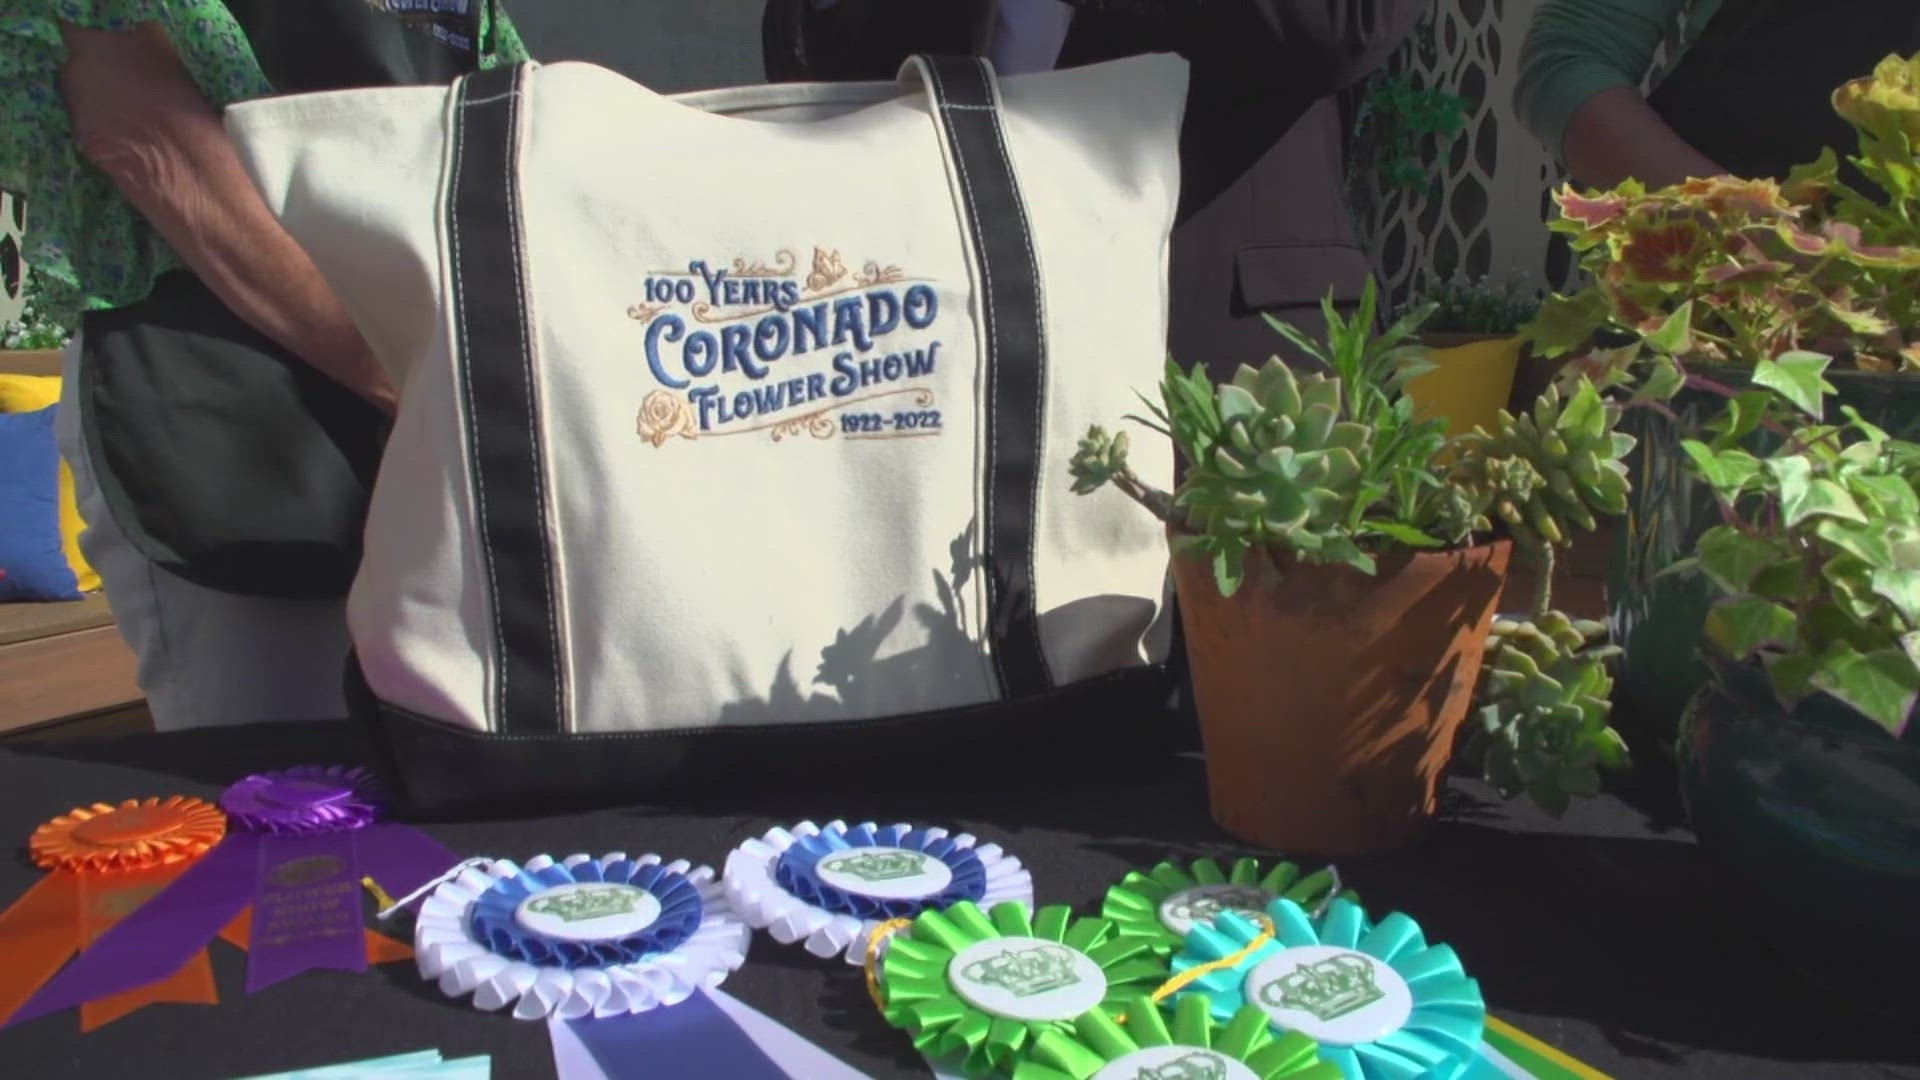 Sarah Kelly, Co-Chair, Coronado Flower Show, and Leslie Crawford – Master Gardener, visit CBS 8 to discuss the 102nd Annual Coronado Flower Festival